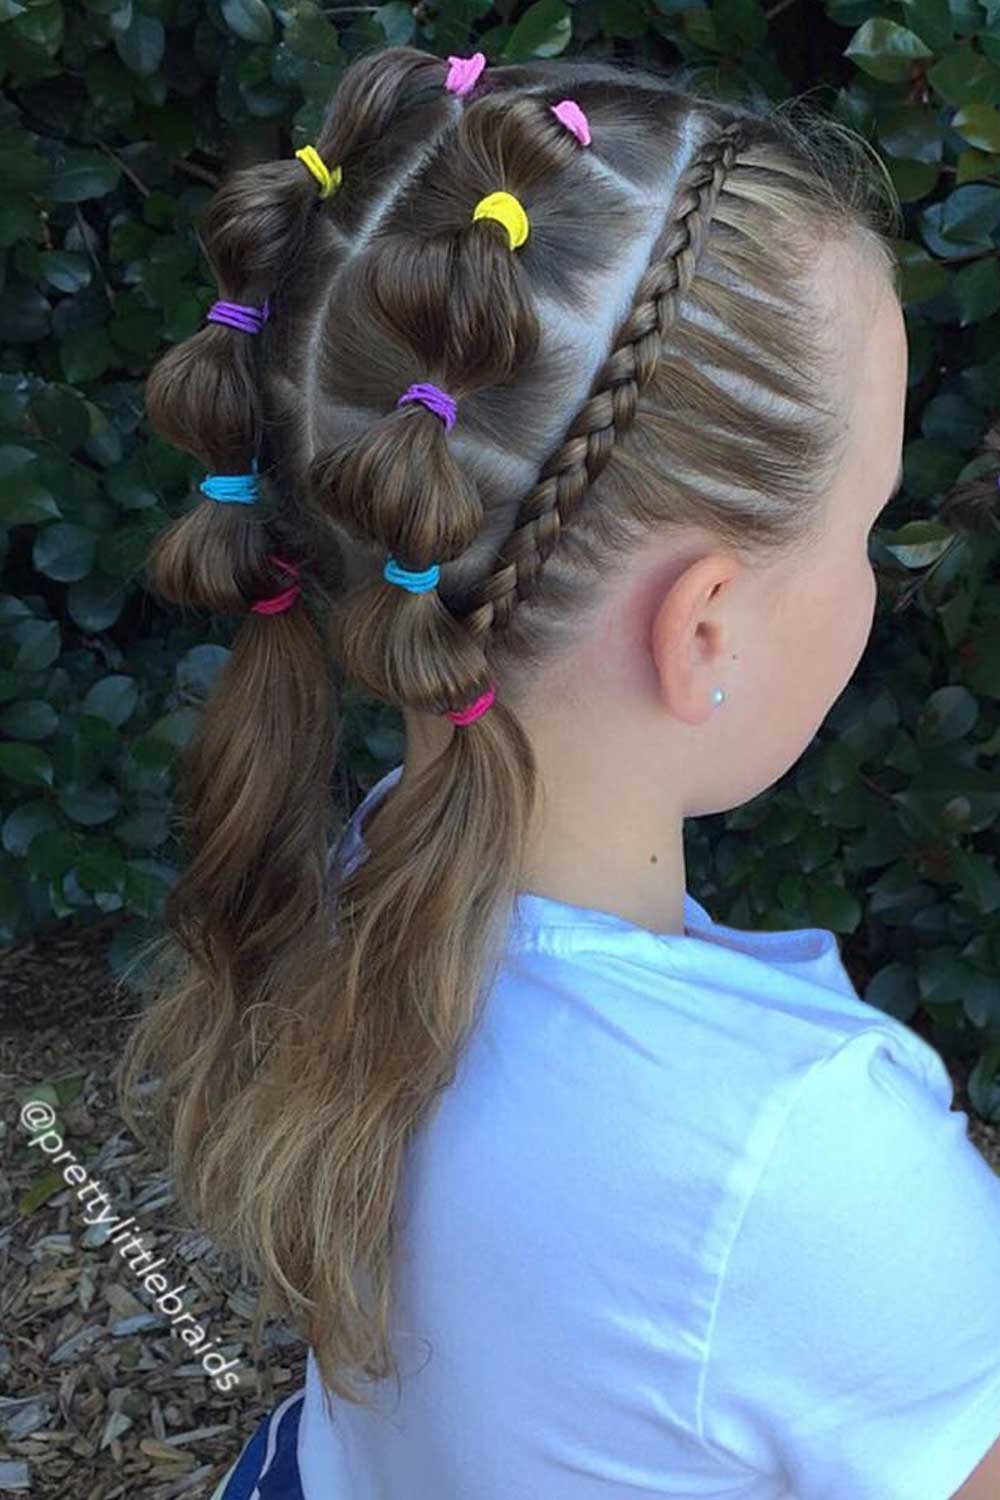 Rubber Band Hairstyles for Girls Bubble Braids #rubberbandhairstyles #naturalhairstyles #kidshairstyles